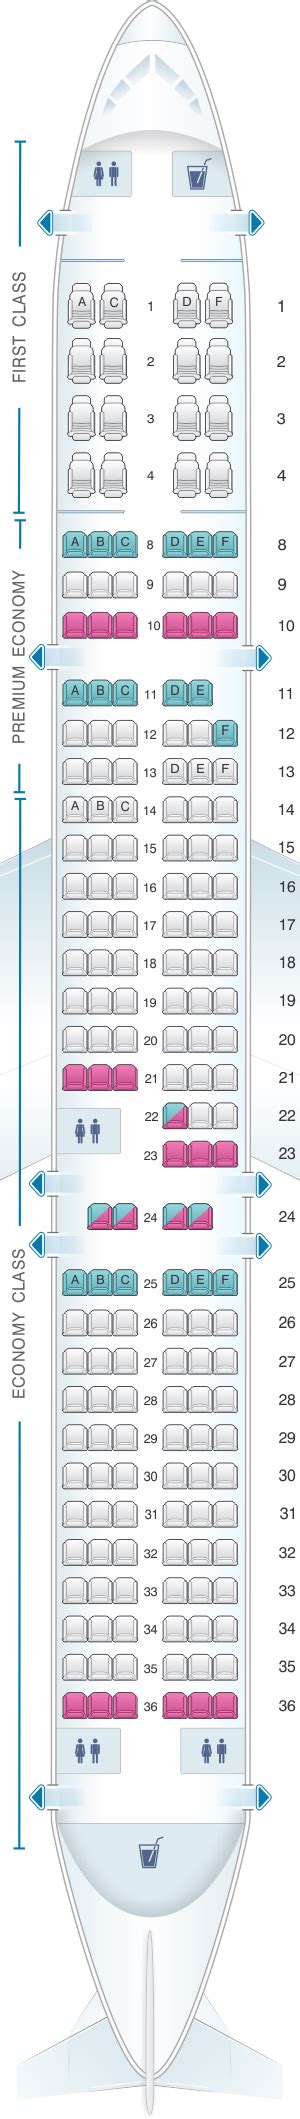 American Airlines Airbus A321 Seat Map